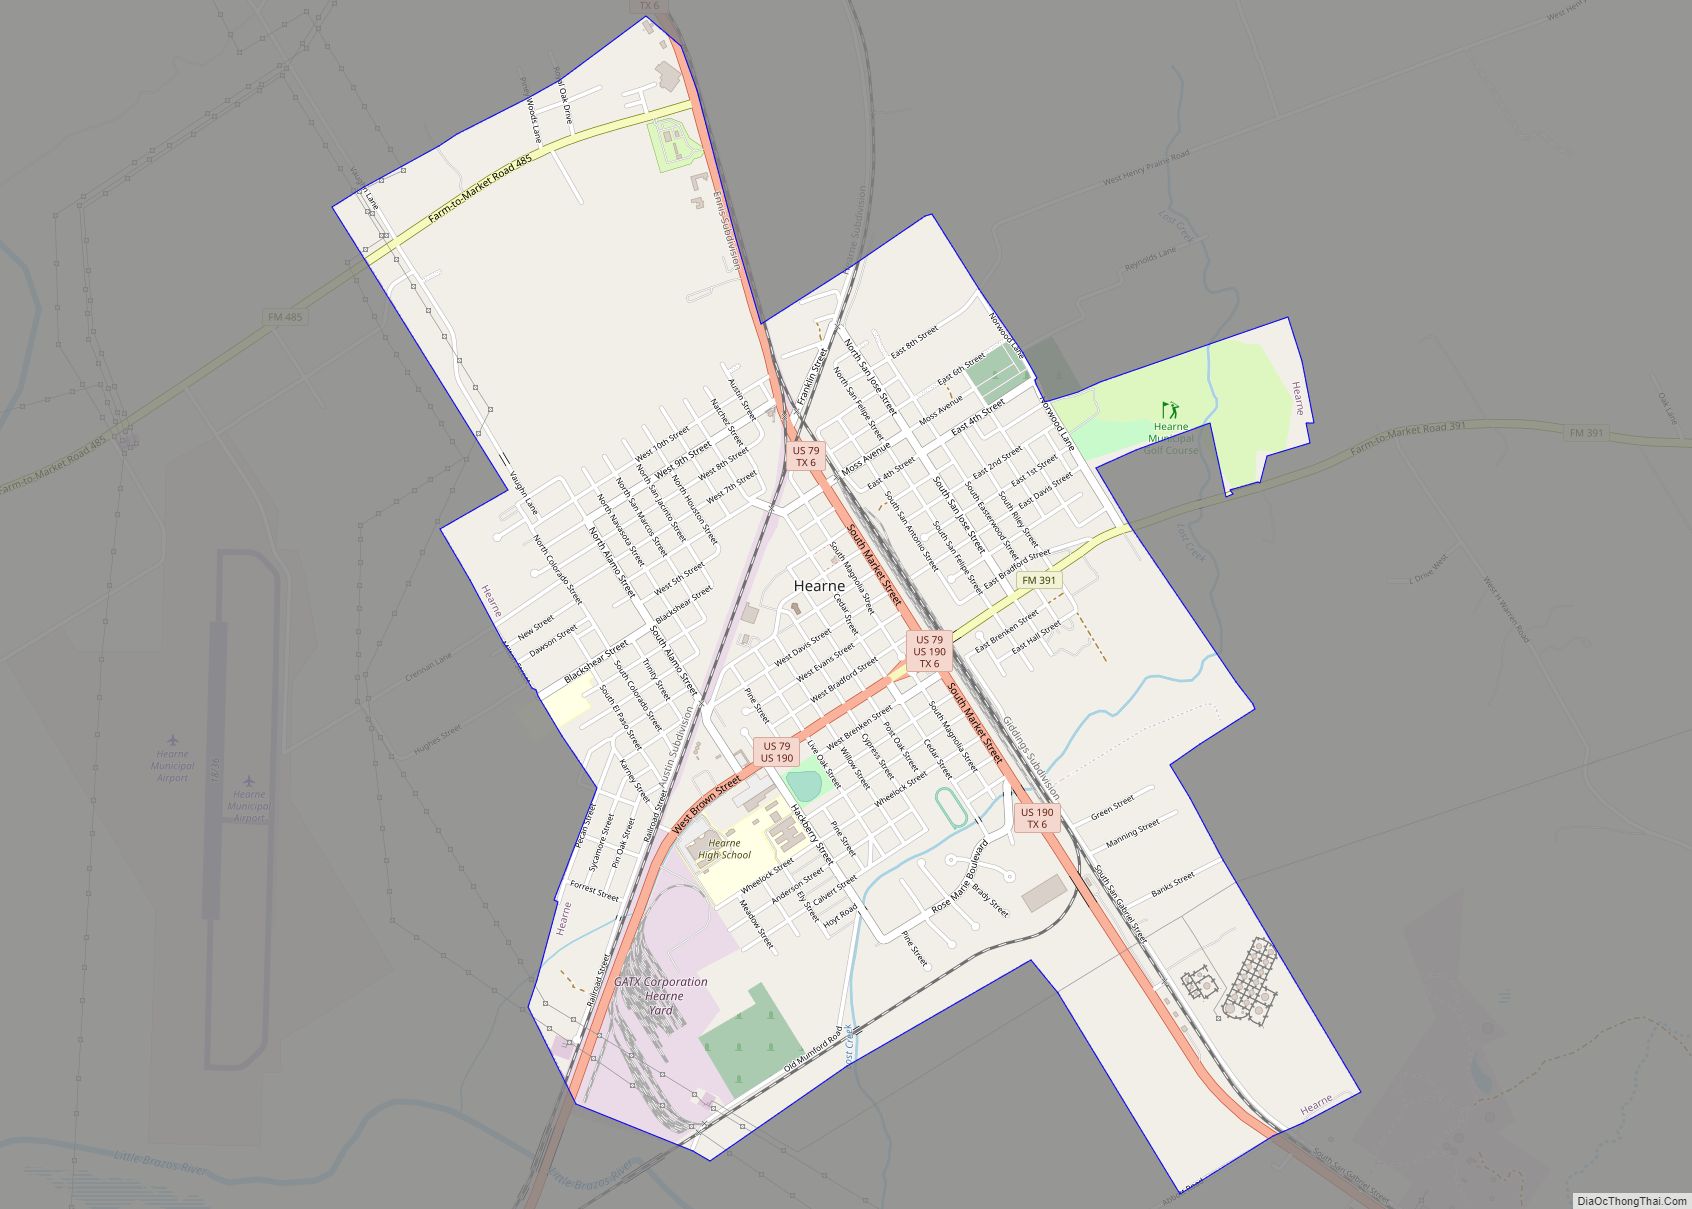 Map of Hearne city